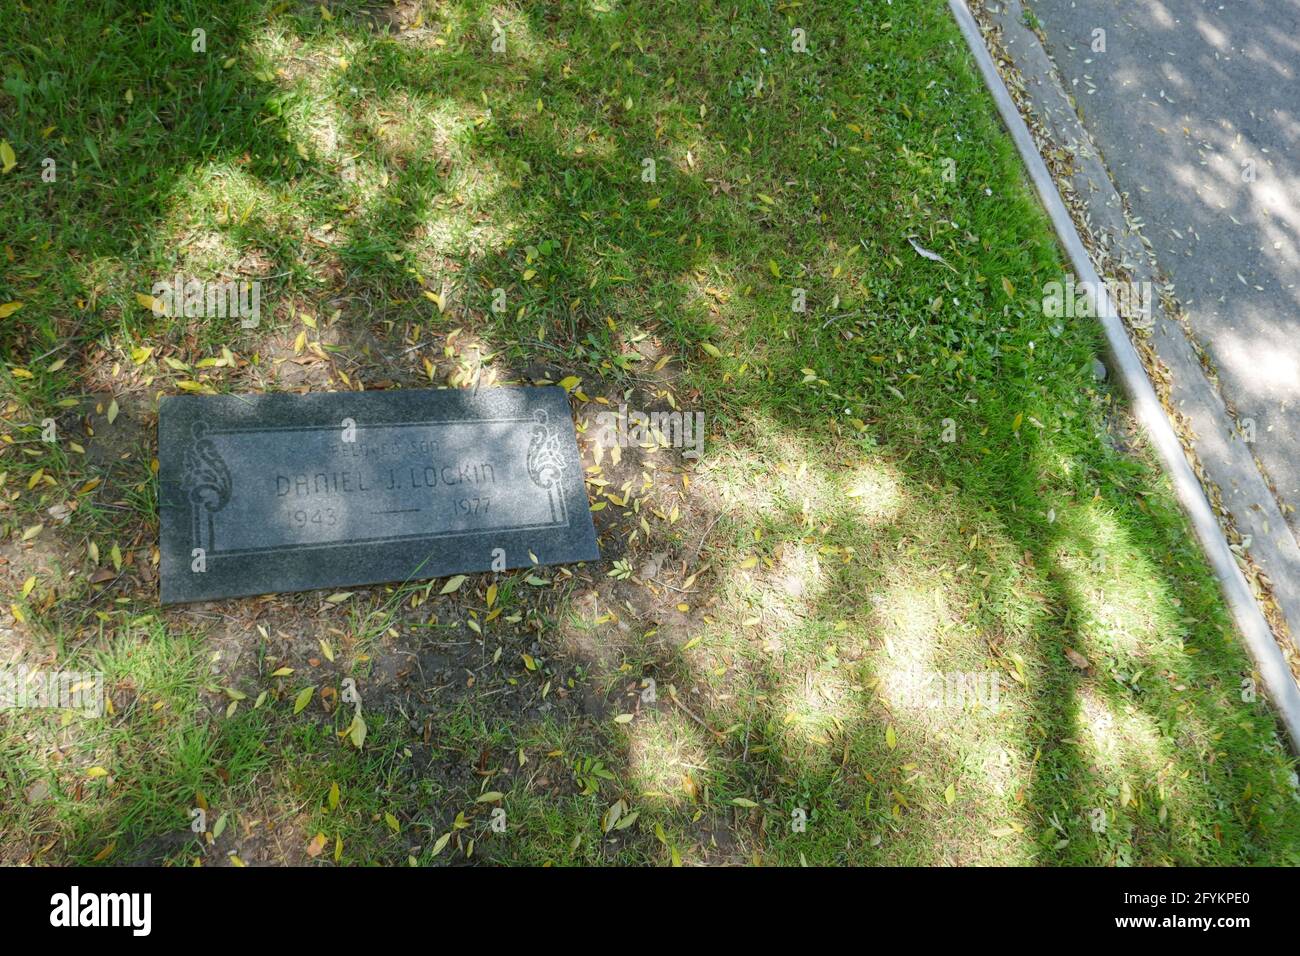 Westminster, California, USA 27th May 2021 A general view of atmosphere actor Daniel Lockin's Grave in Four Seasons Section at Westminster Memorial Park on May 27, 2021 in Westminster, California, USA. Photo by Barry King/Alamy Stock Photo Stock Photo